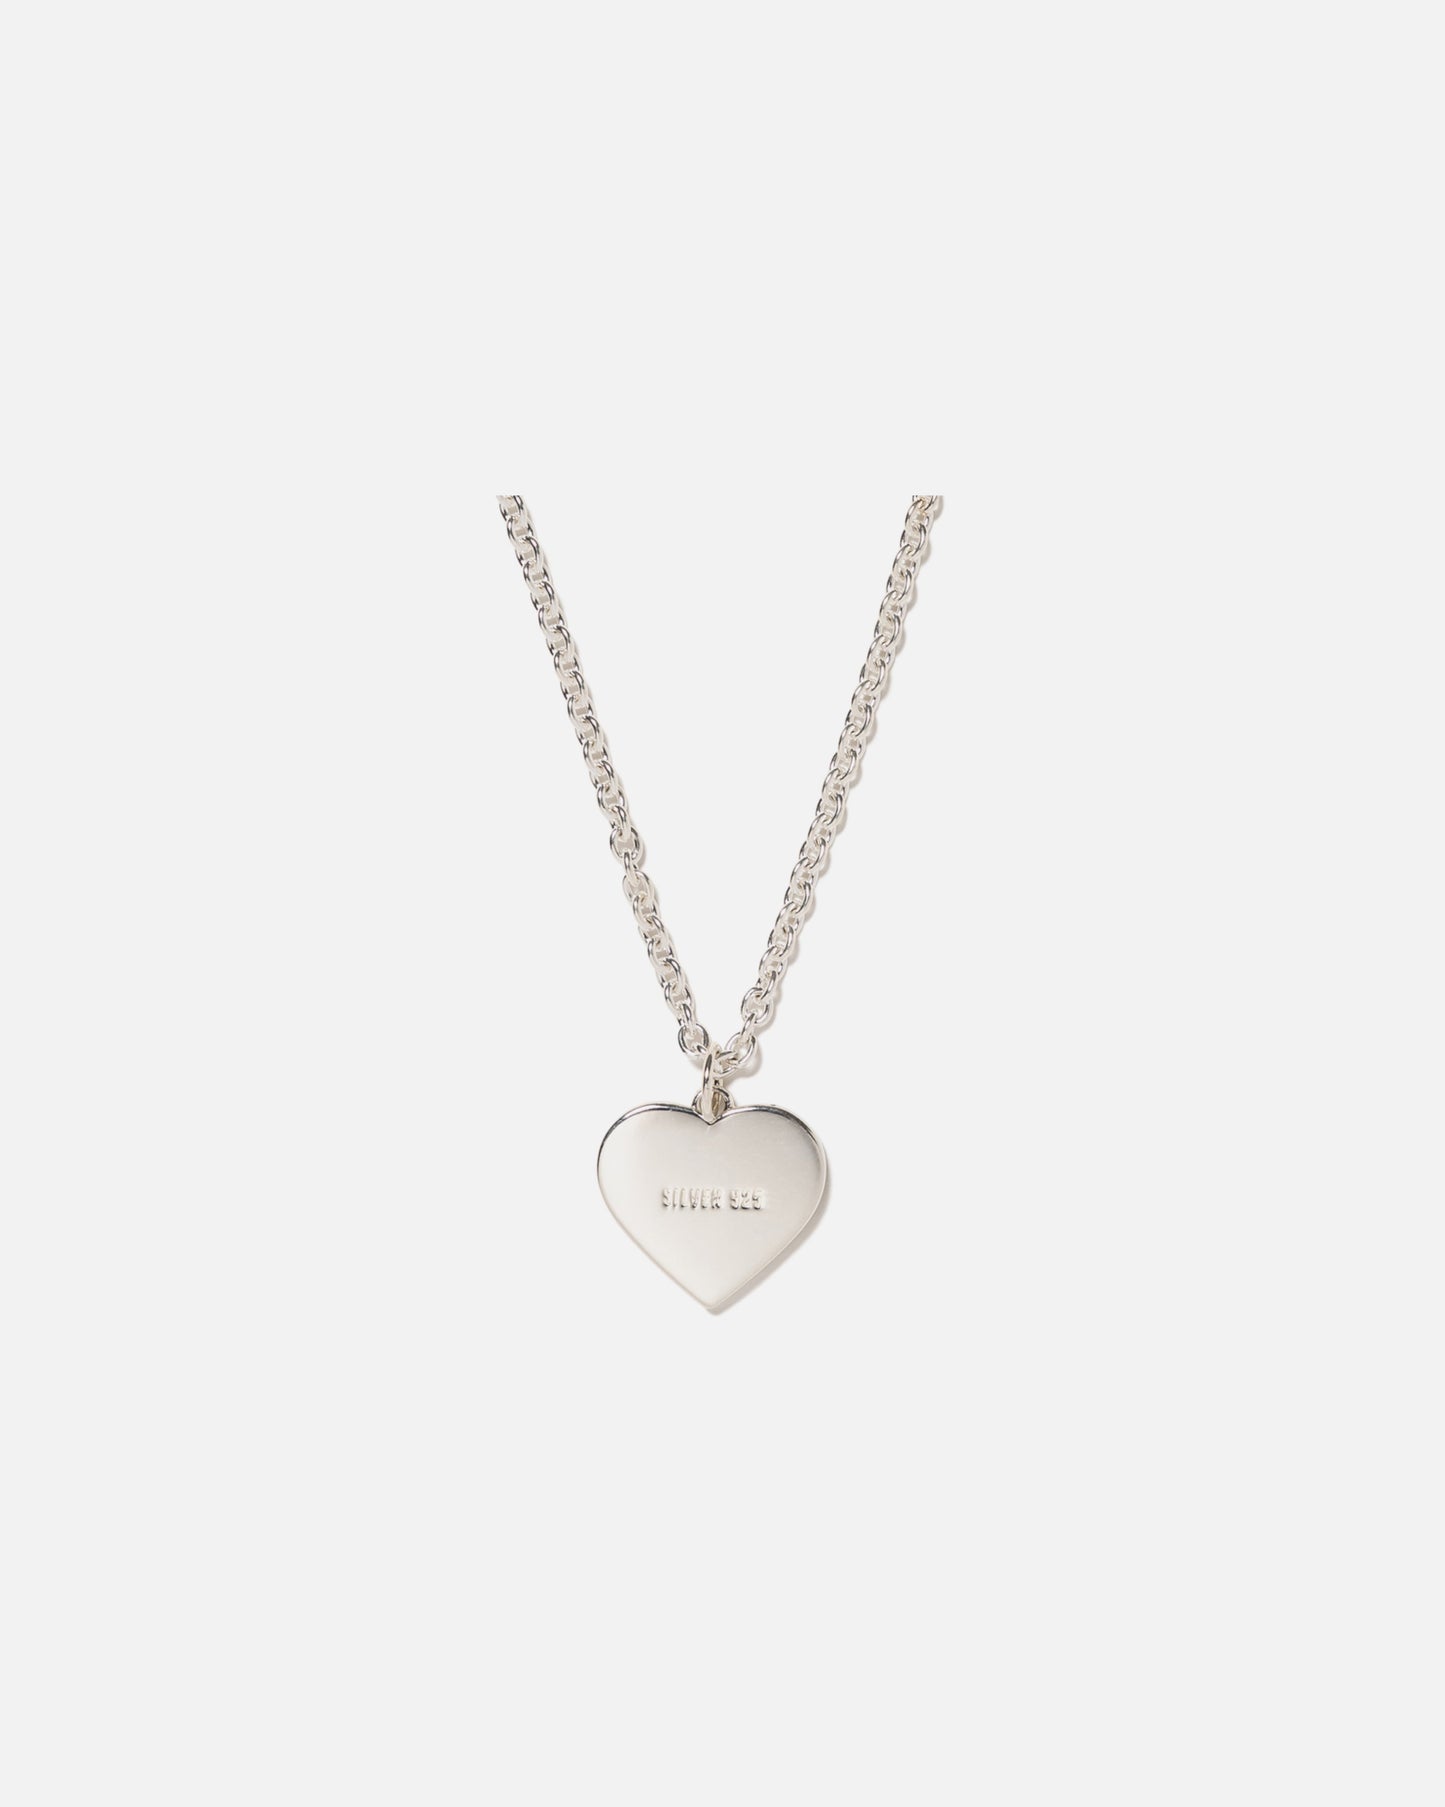 HEART SILVER NECKLACE（RED）